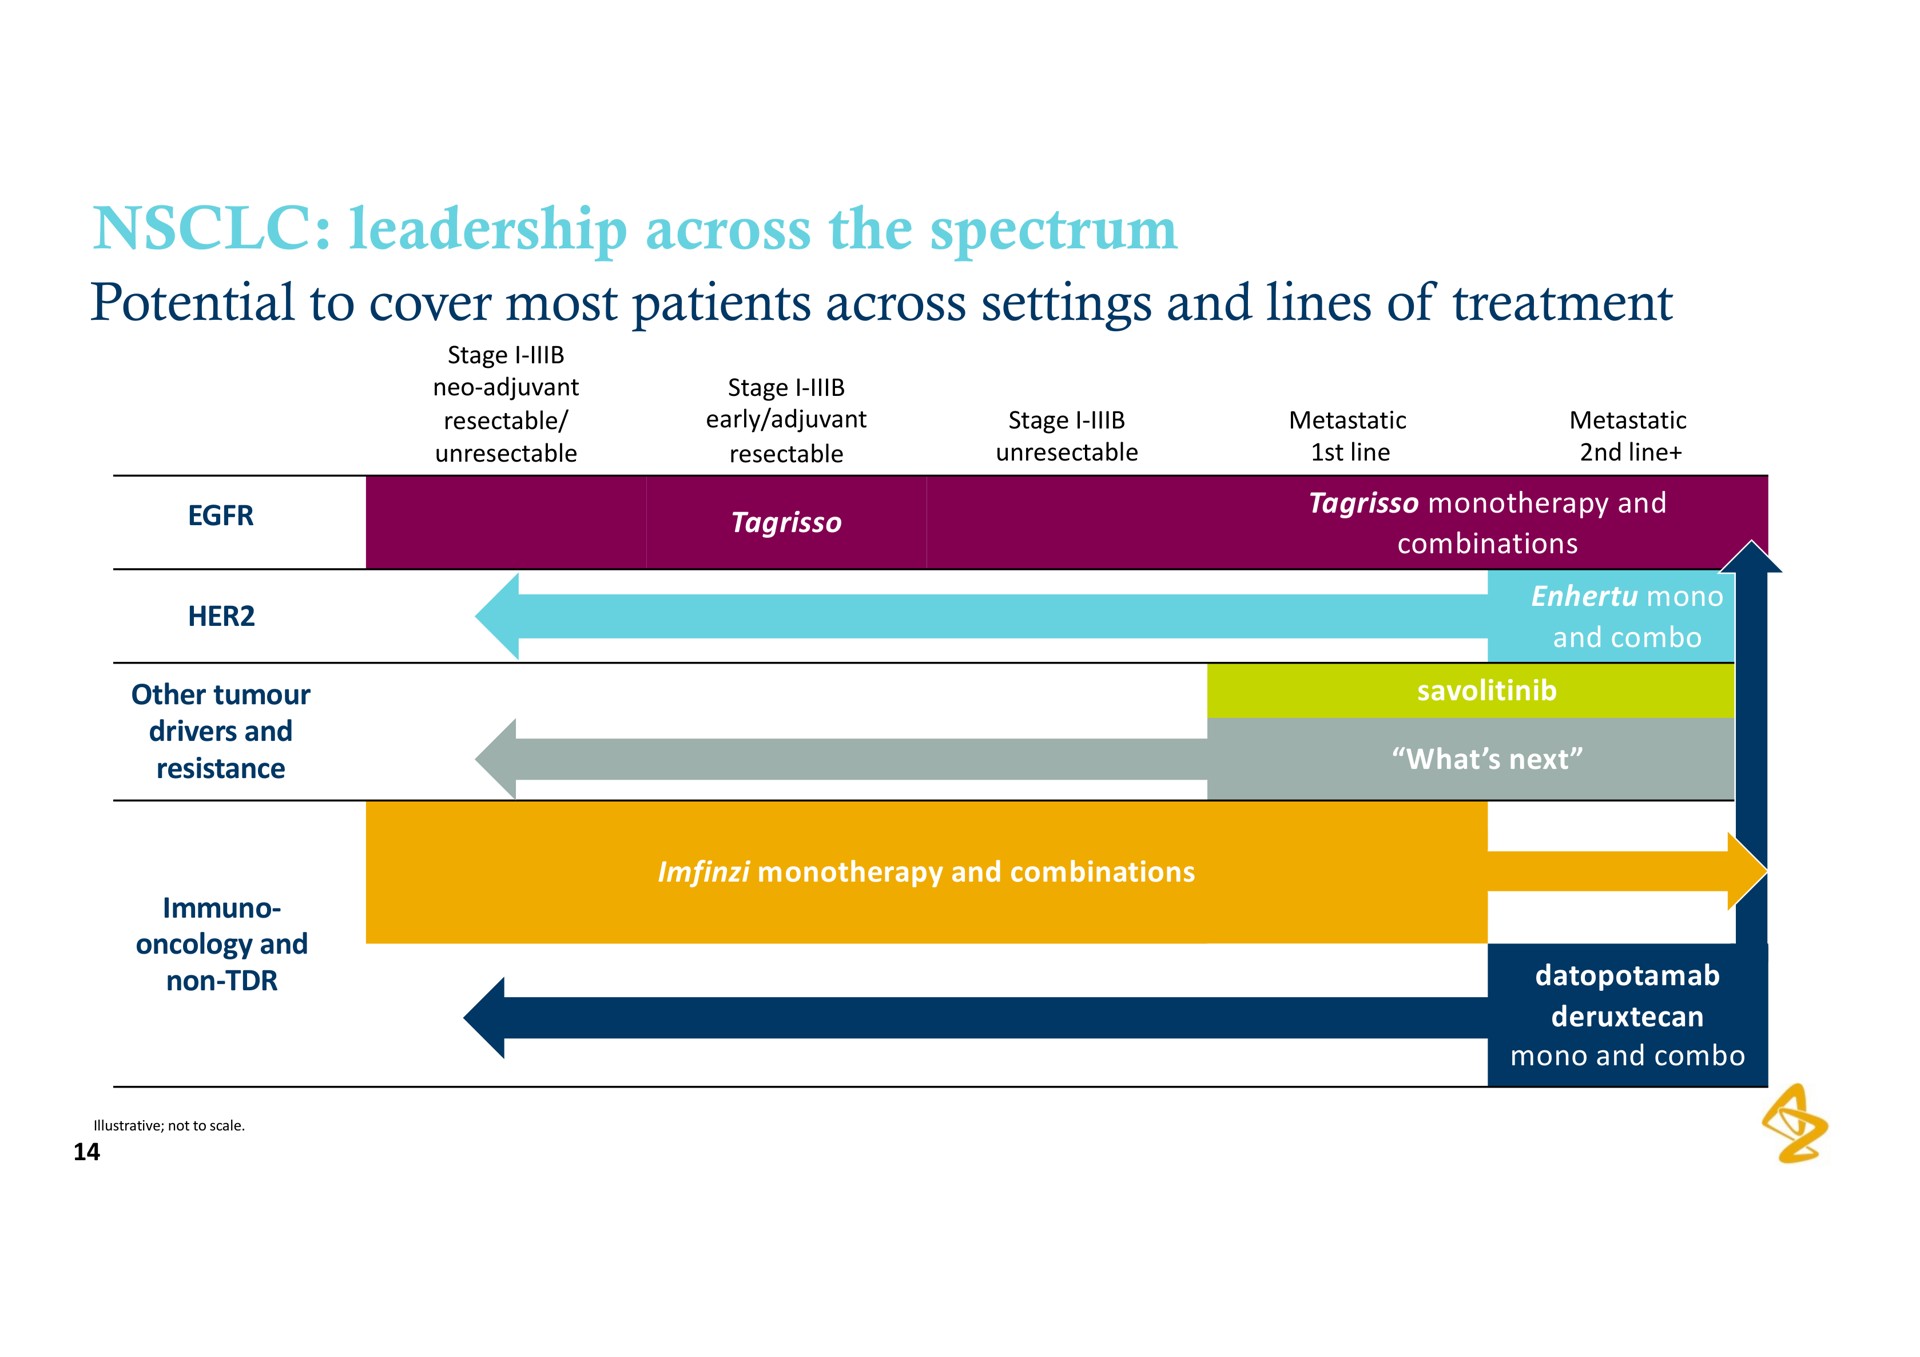 leadership across the spectrum potential to cover most patients settings and lines of treatment | AstraZeneca